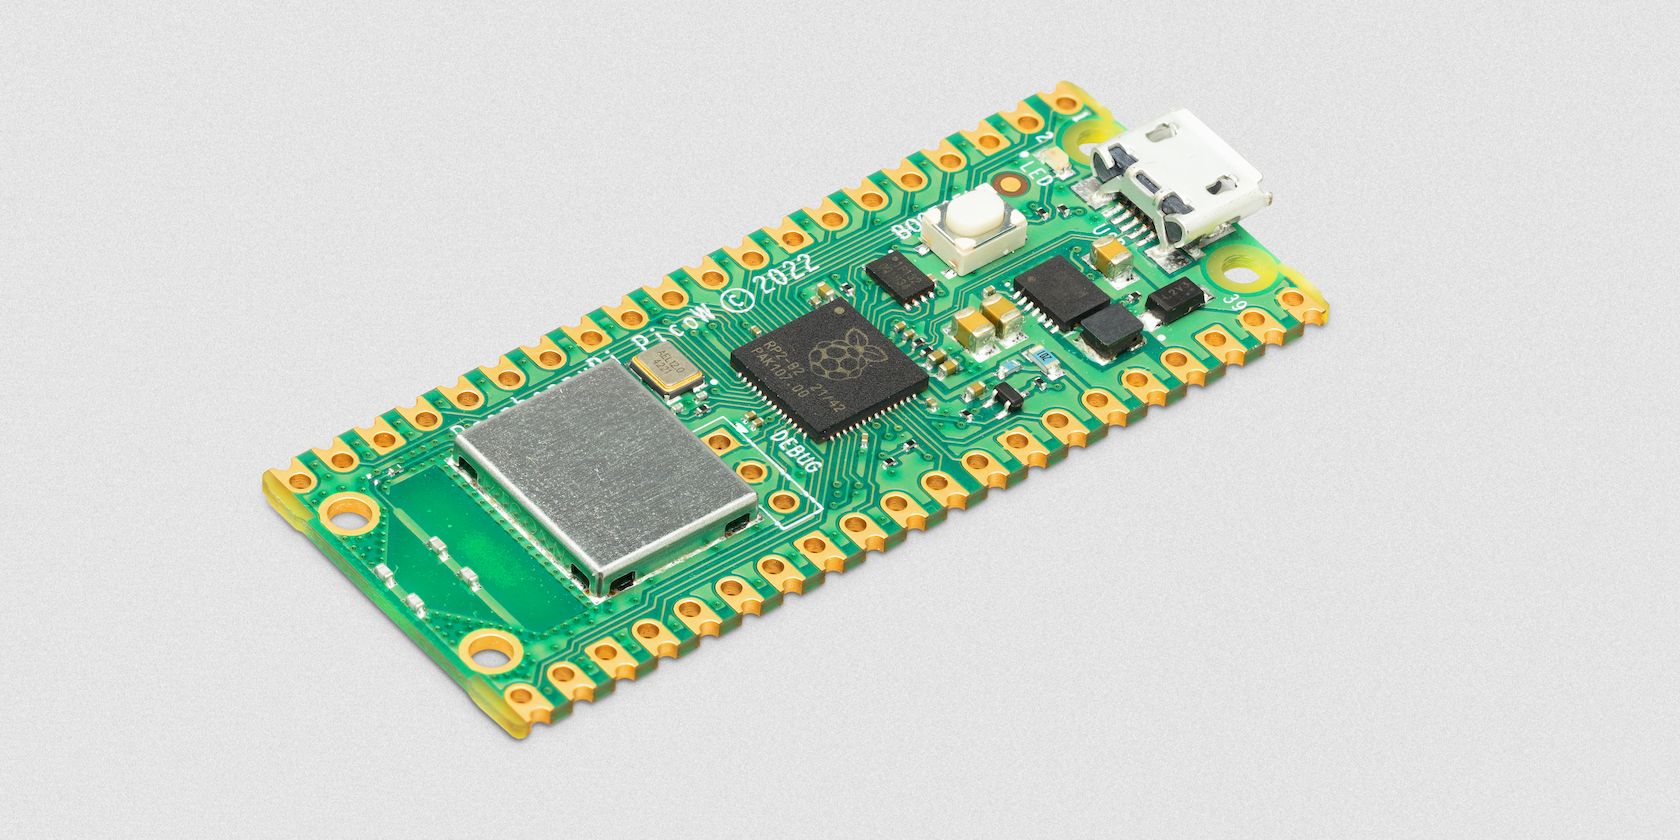 What Is a Raspberry Pico W and What Can You Use It For?